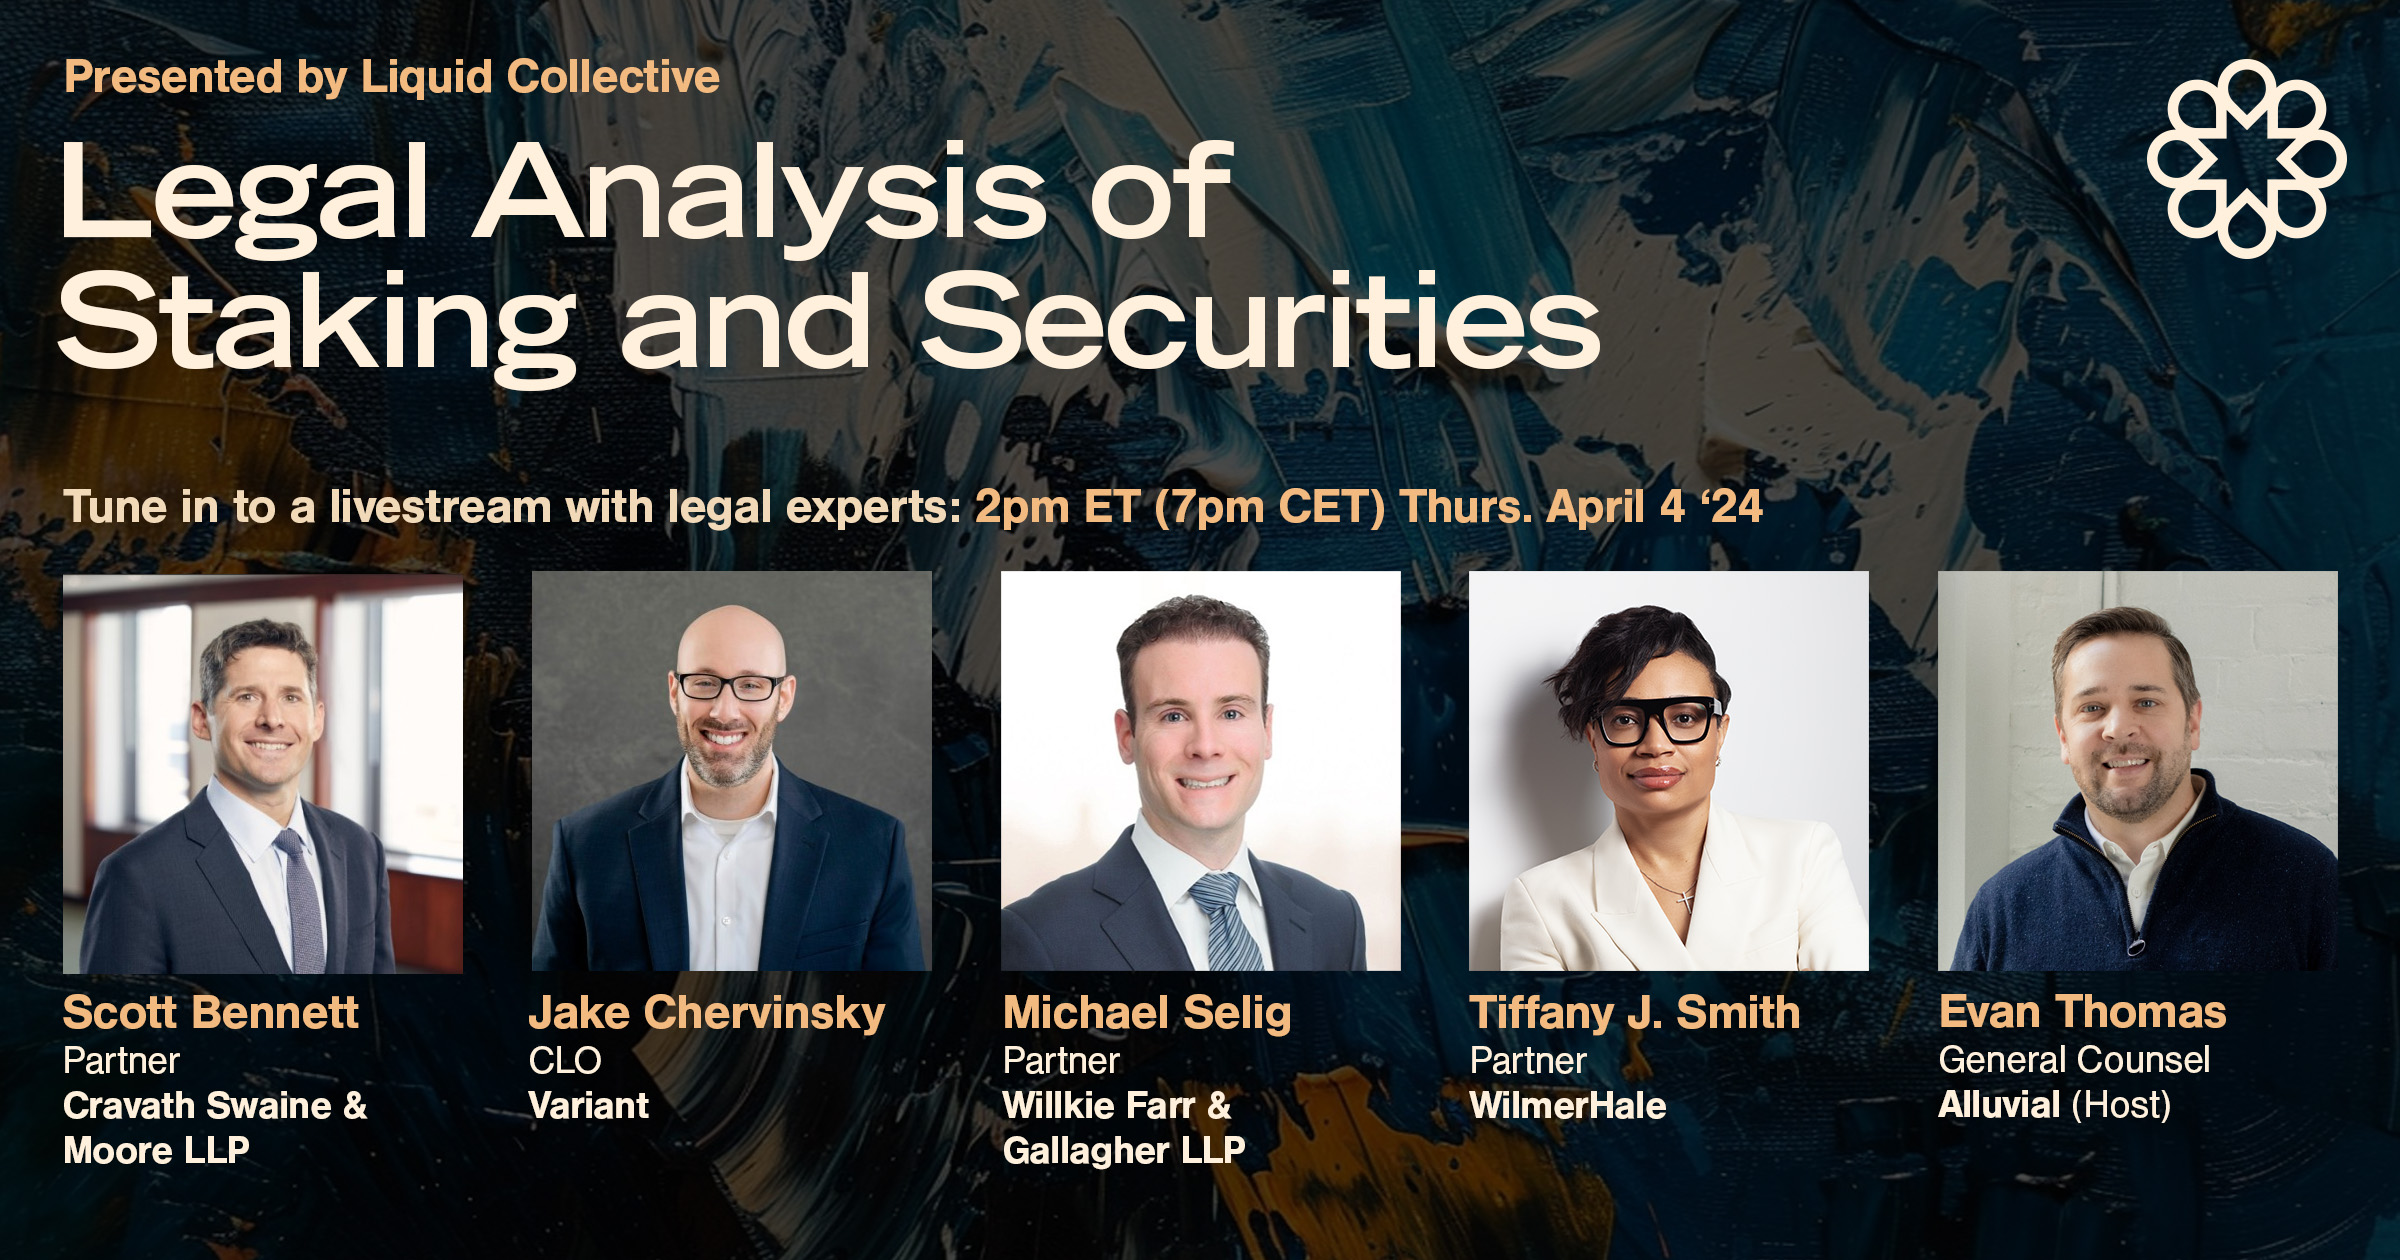 Event: “Legal Analysis of Staking and Securities”